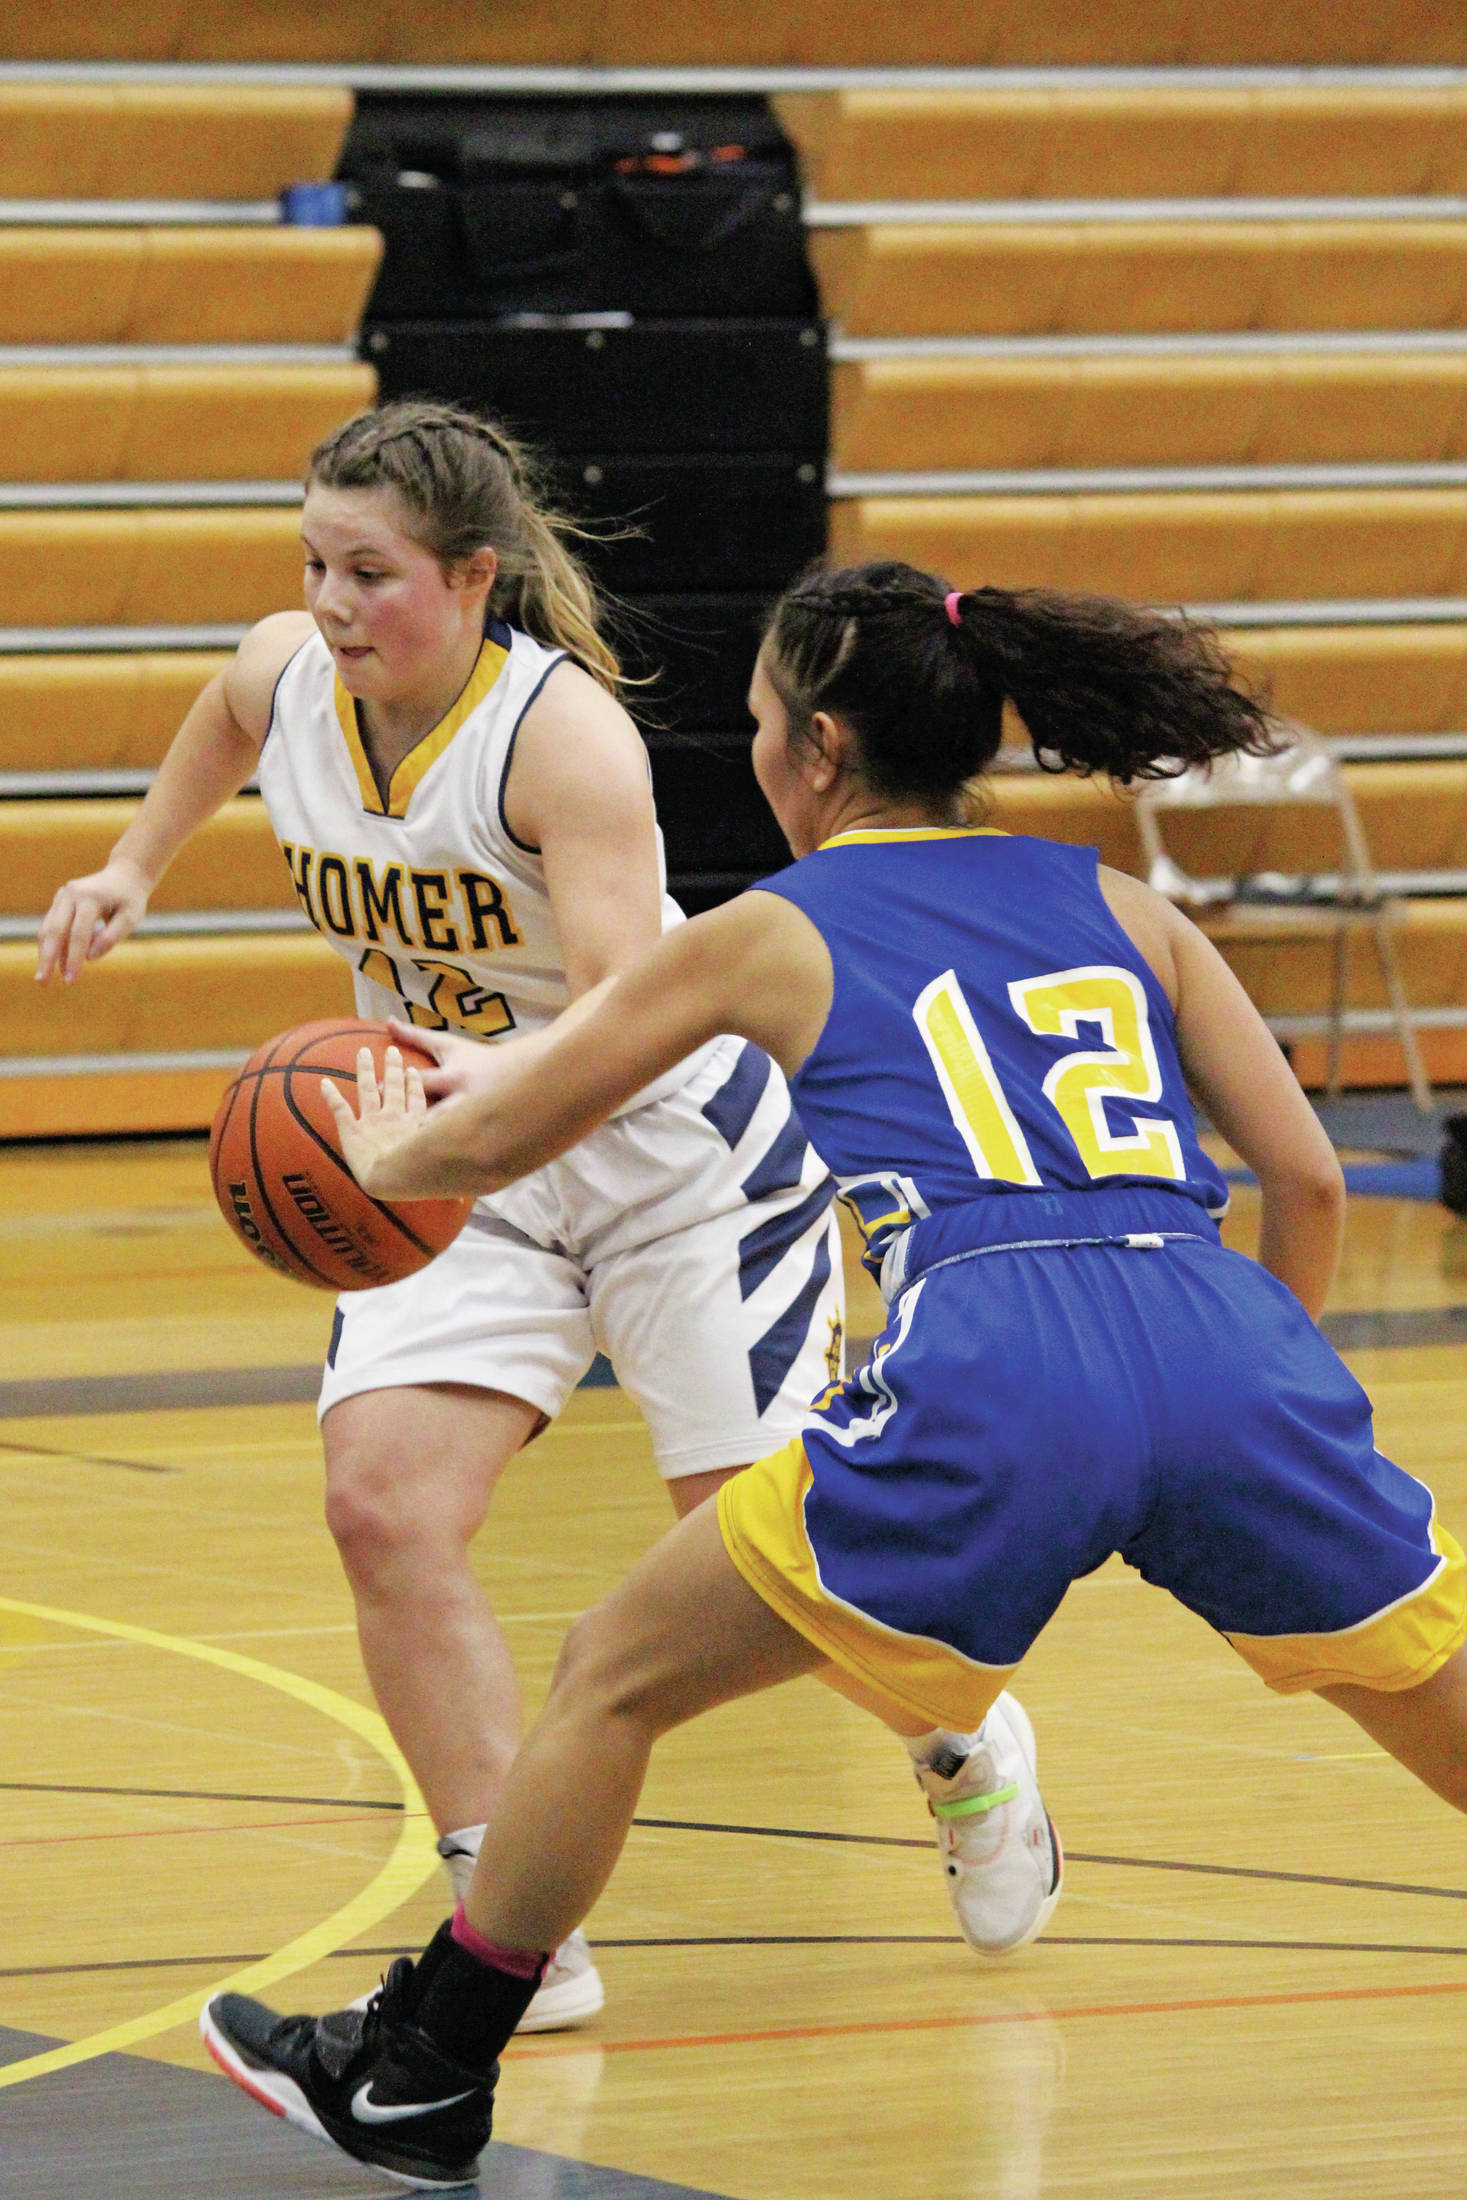 Galena’s Julia Heckman tries to knock the ball away from Homer’s Rylee Doughty during a Friday, Feb. 7, 2020 basketball game during the Homer Winter Carnival Basketball Tournament at Homer High School in Homer, Alaska. (Photo by Megan Pacer/Homer News)